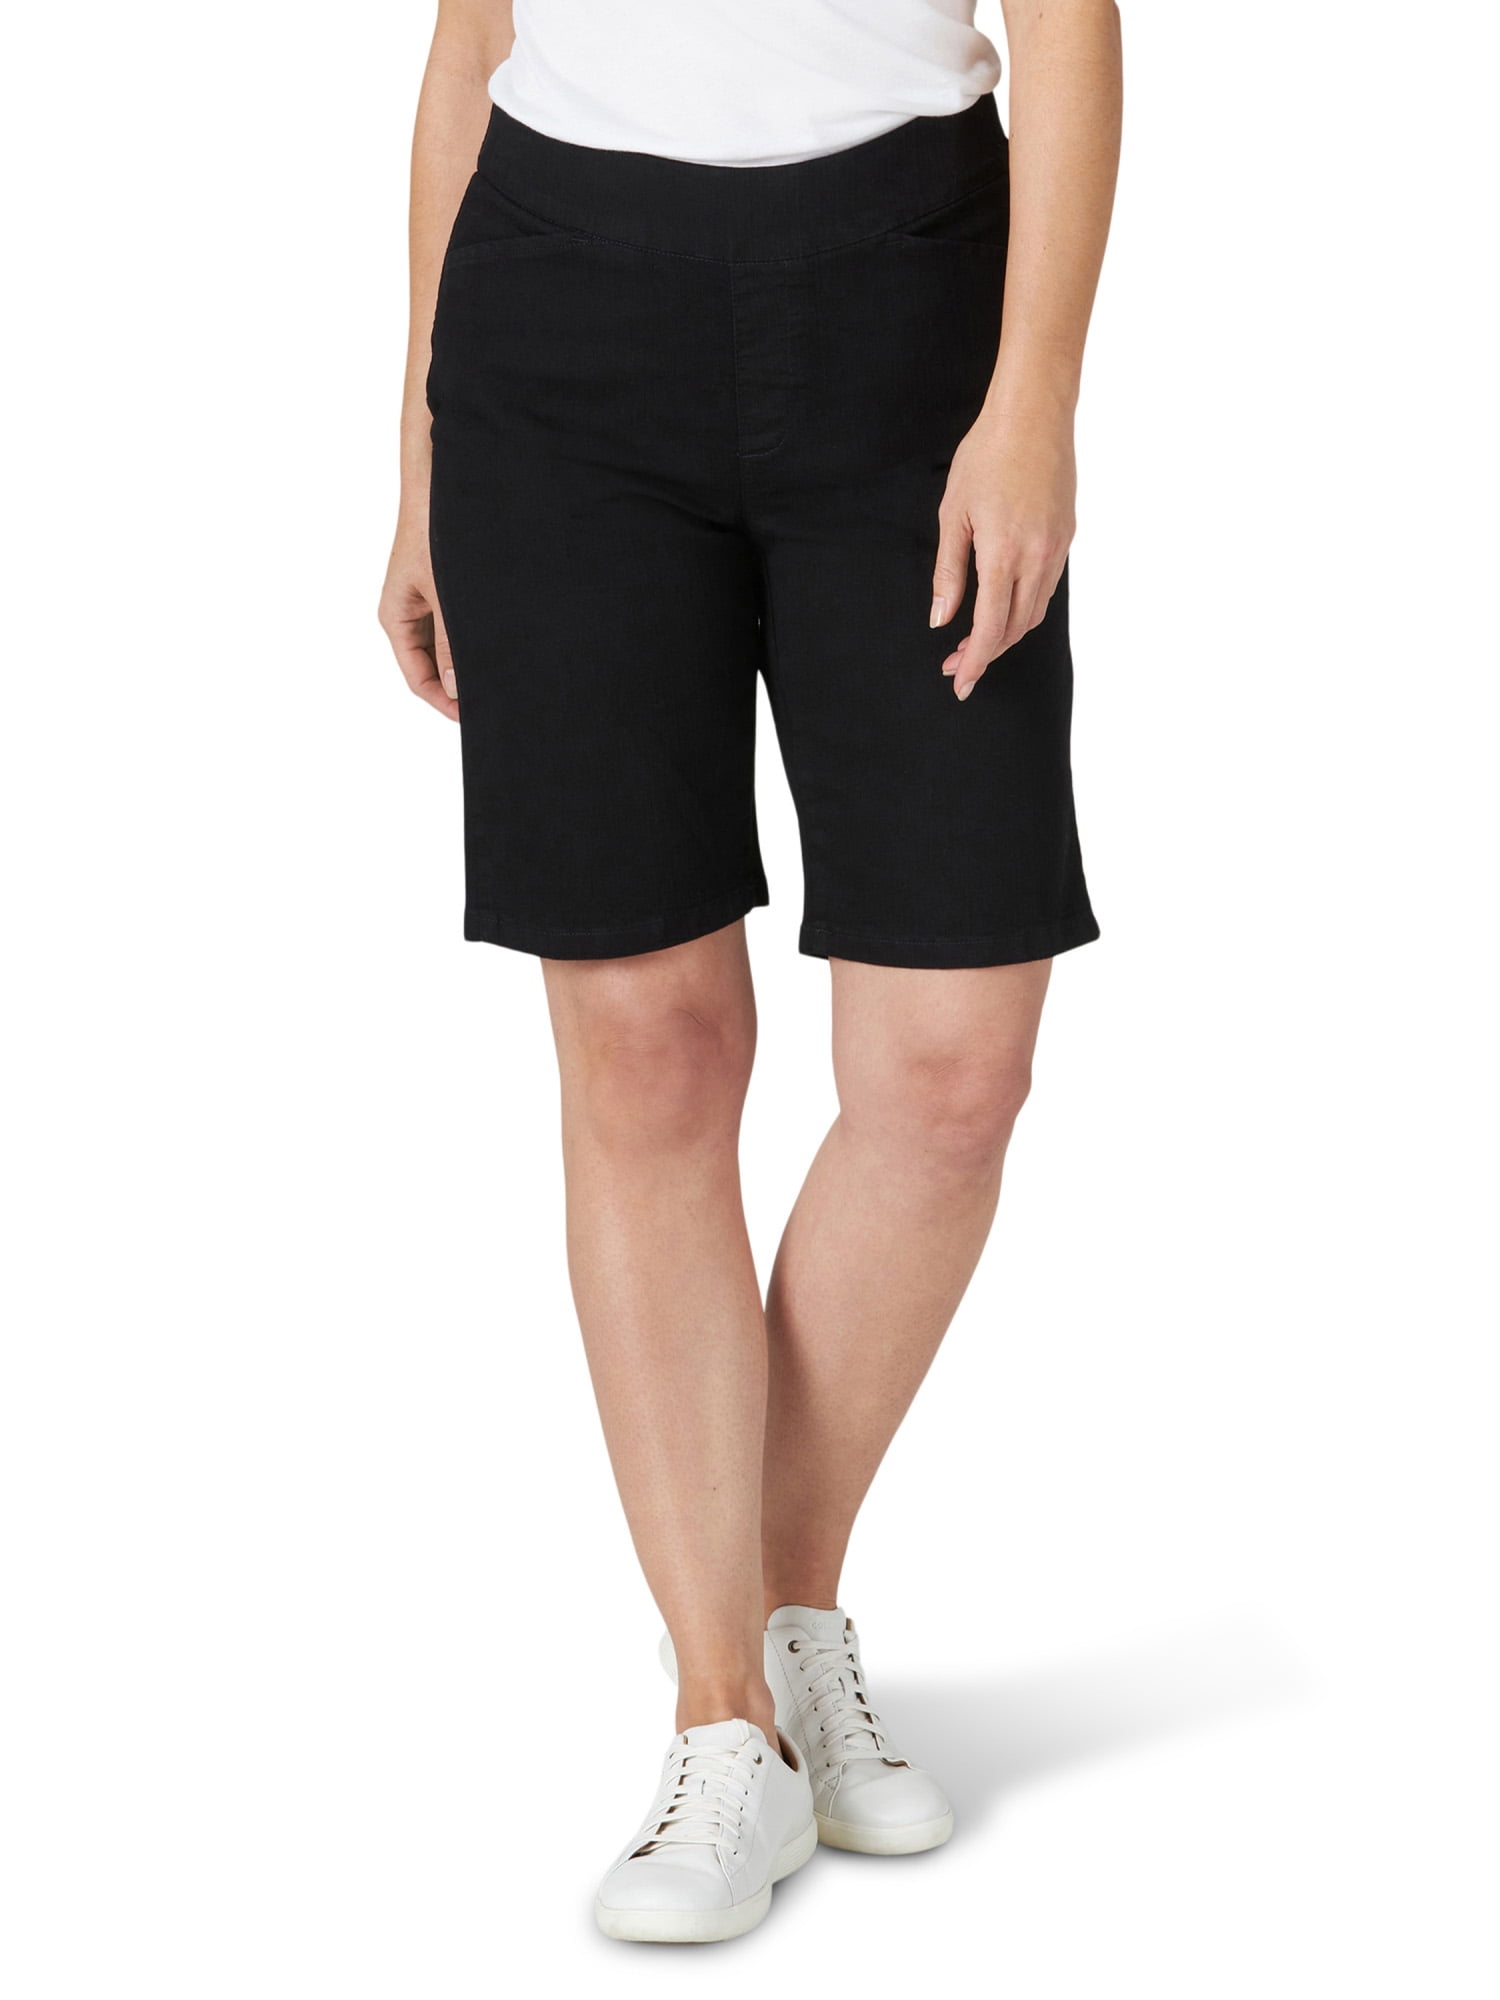 Chic Classic Collection Women/'s Relaxed Fit Flat Front Elastic Waist Bermuda Short 18 Black Denim